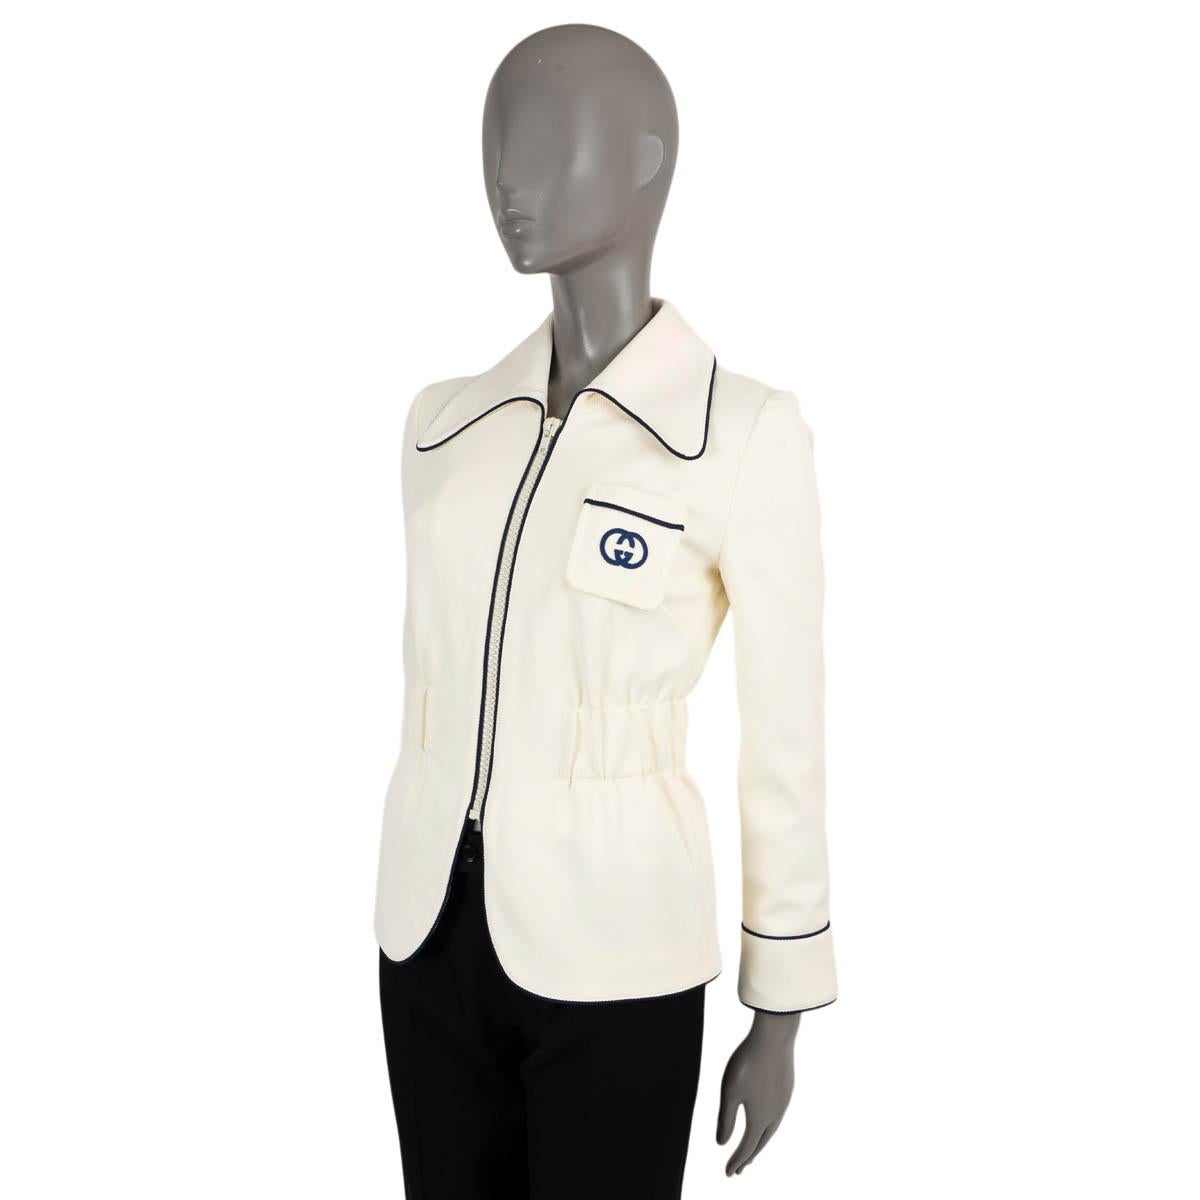 100% authentic Gucci interlocking GG jacket in ivory jersey polyamide (100%) with navy blue trim. The design features a front zipper, zipped cuffs, a chest patch pocket and an elastic waistband. Lined in ivory viscose (68%) and silk (32%). Has been